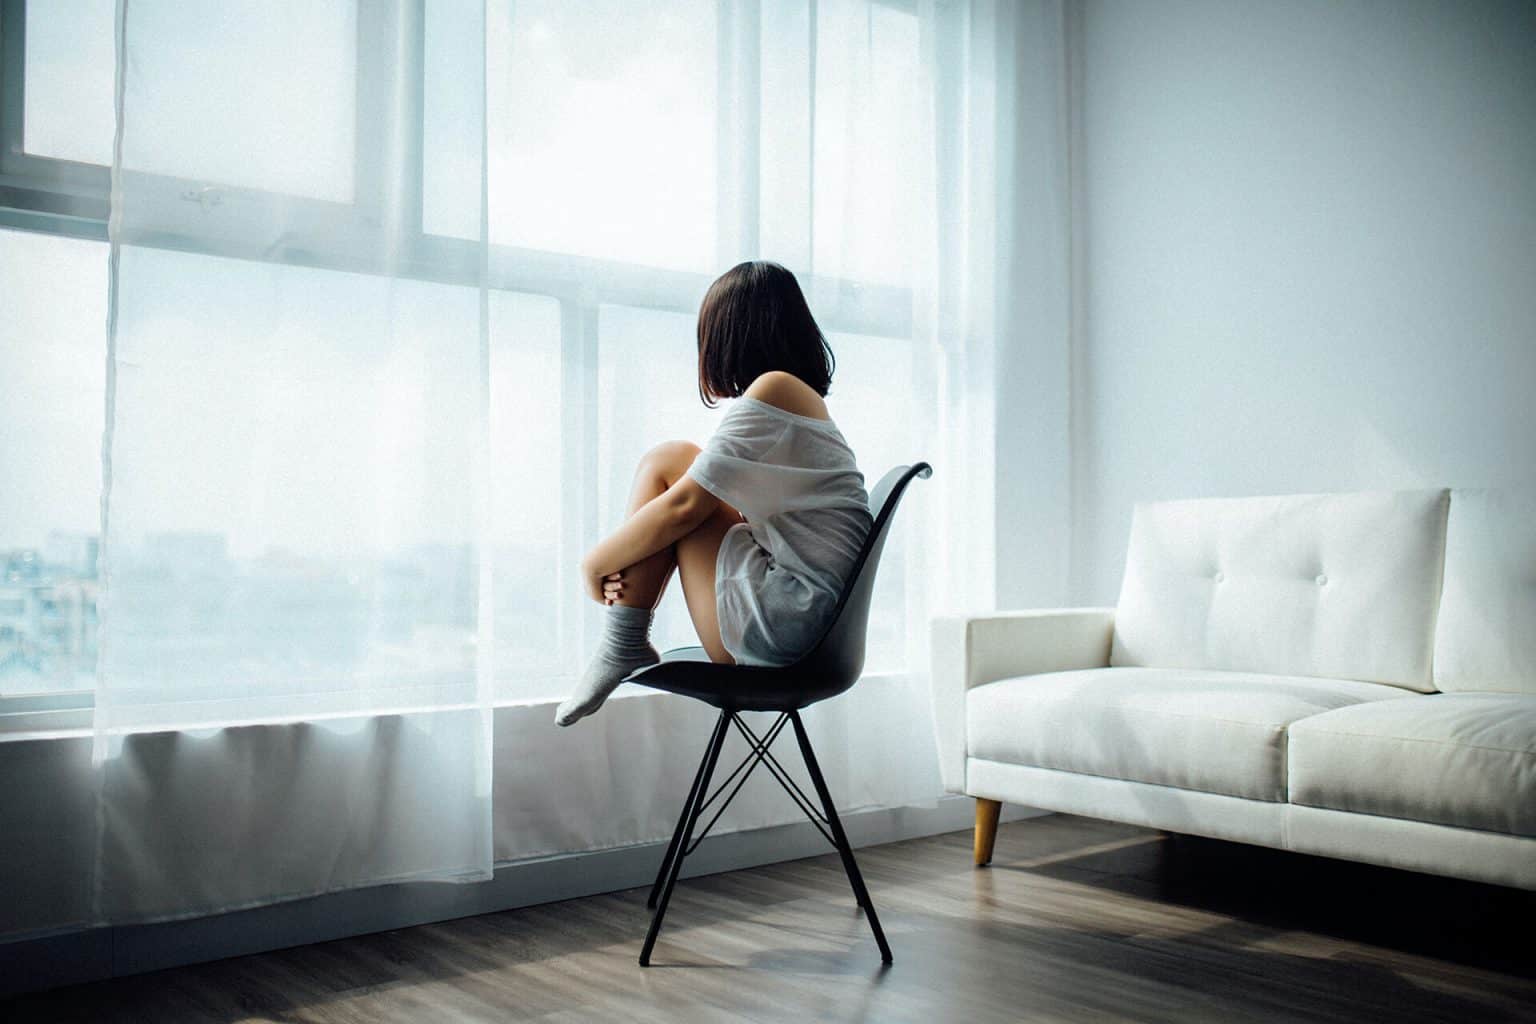 girl sitting on a chair, looking out the window